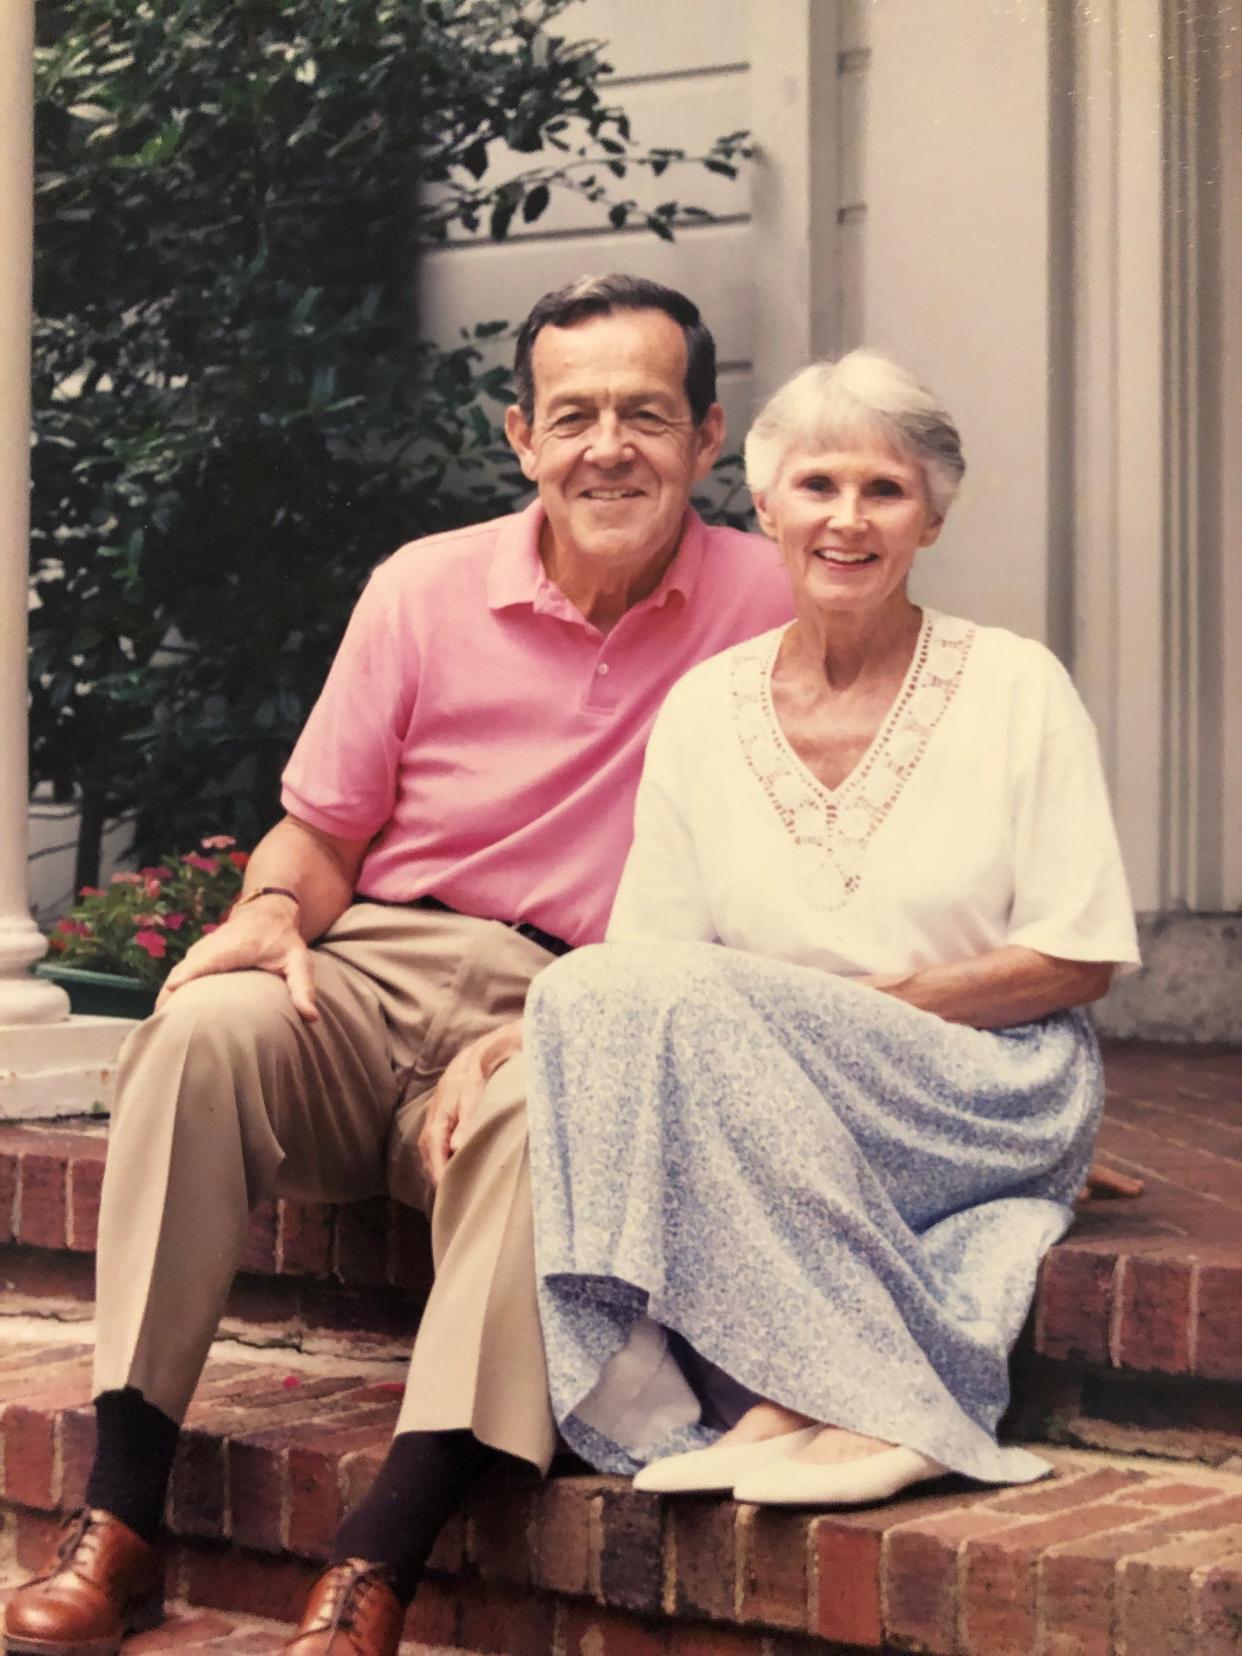 Dr. Wayne Montgomery, Asheville's first Republican mayor, who died Jan. 6, and his late wife Betsy Montgomery, who died in 2013.